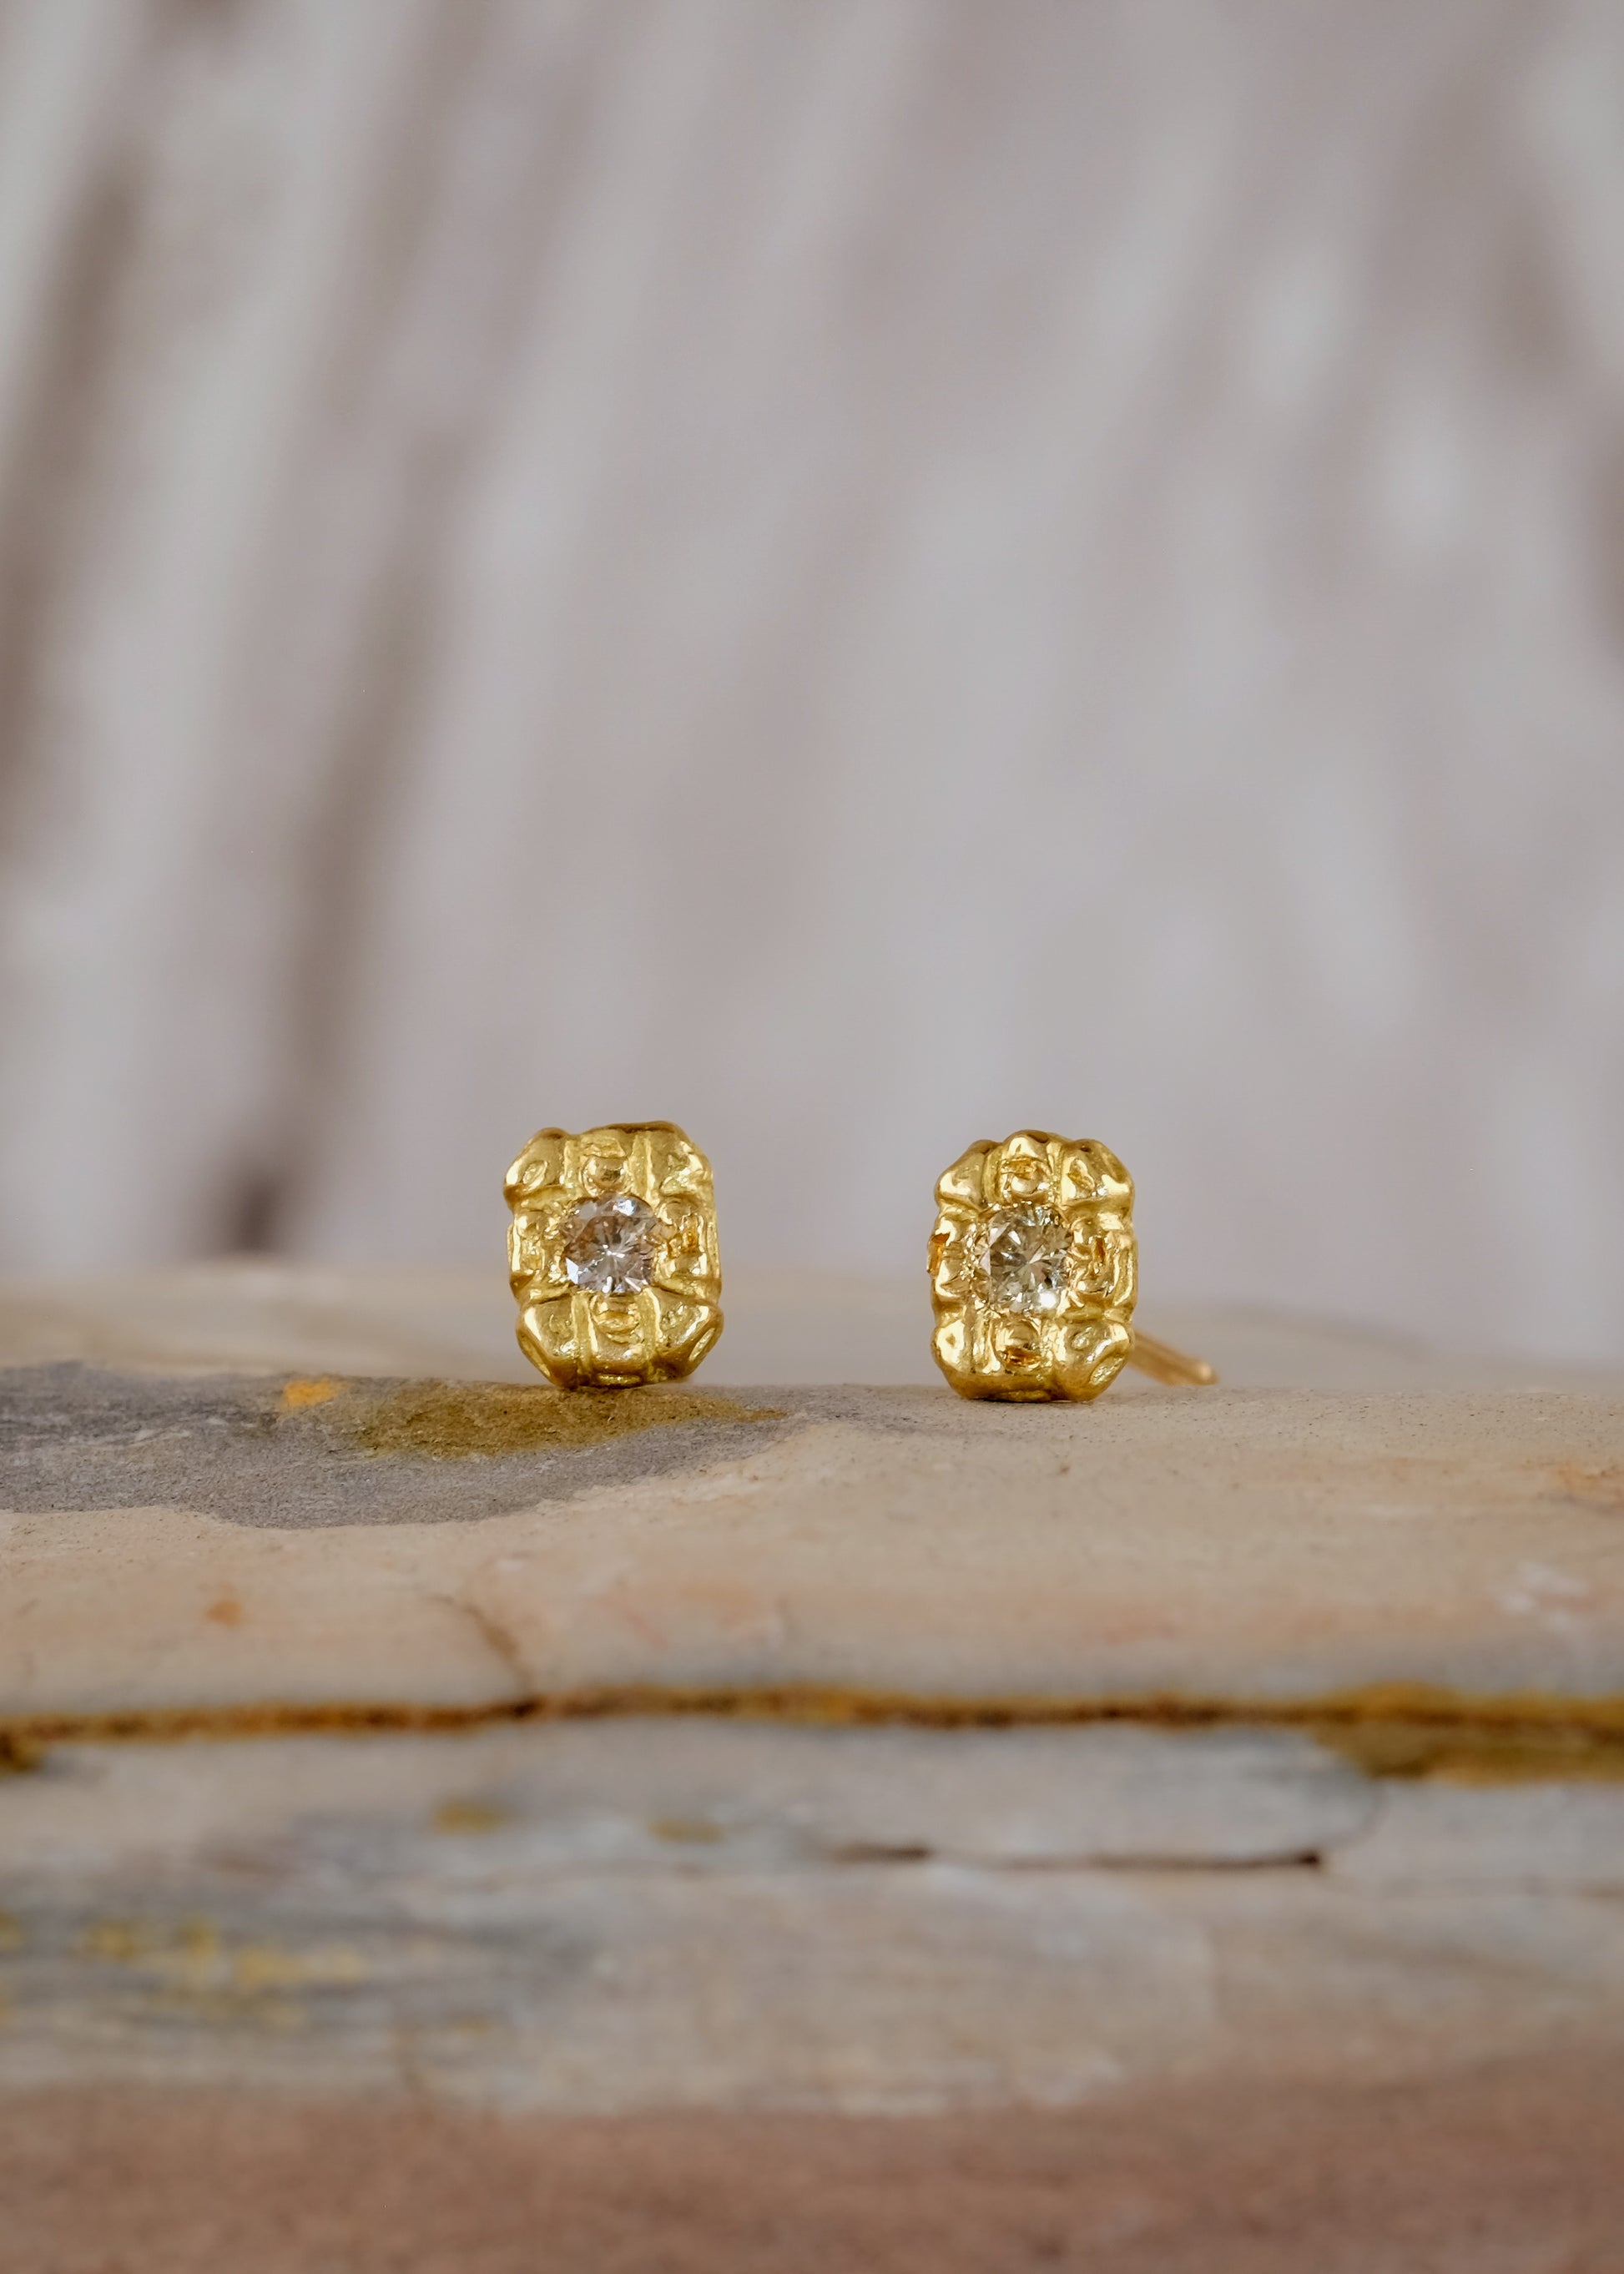 Textured gold, hand-carved to reveal its lustre, surrounds gleaming diamonds to create the Barre earring—an essential and elegant design that calls to mind the effortless grace of a ballerina at the barre. 